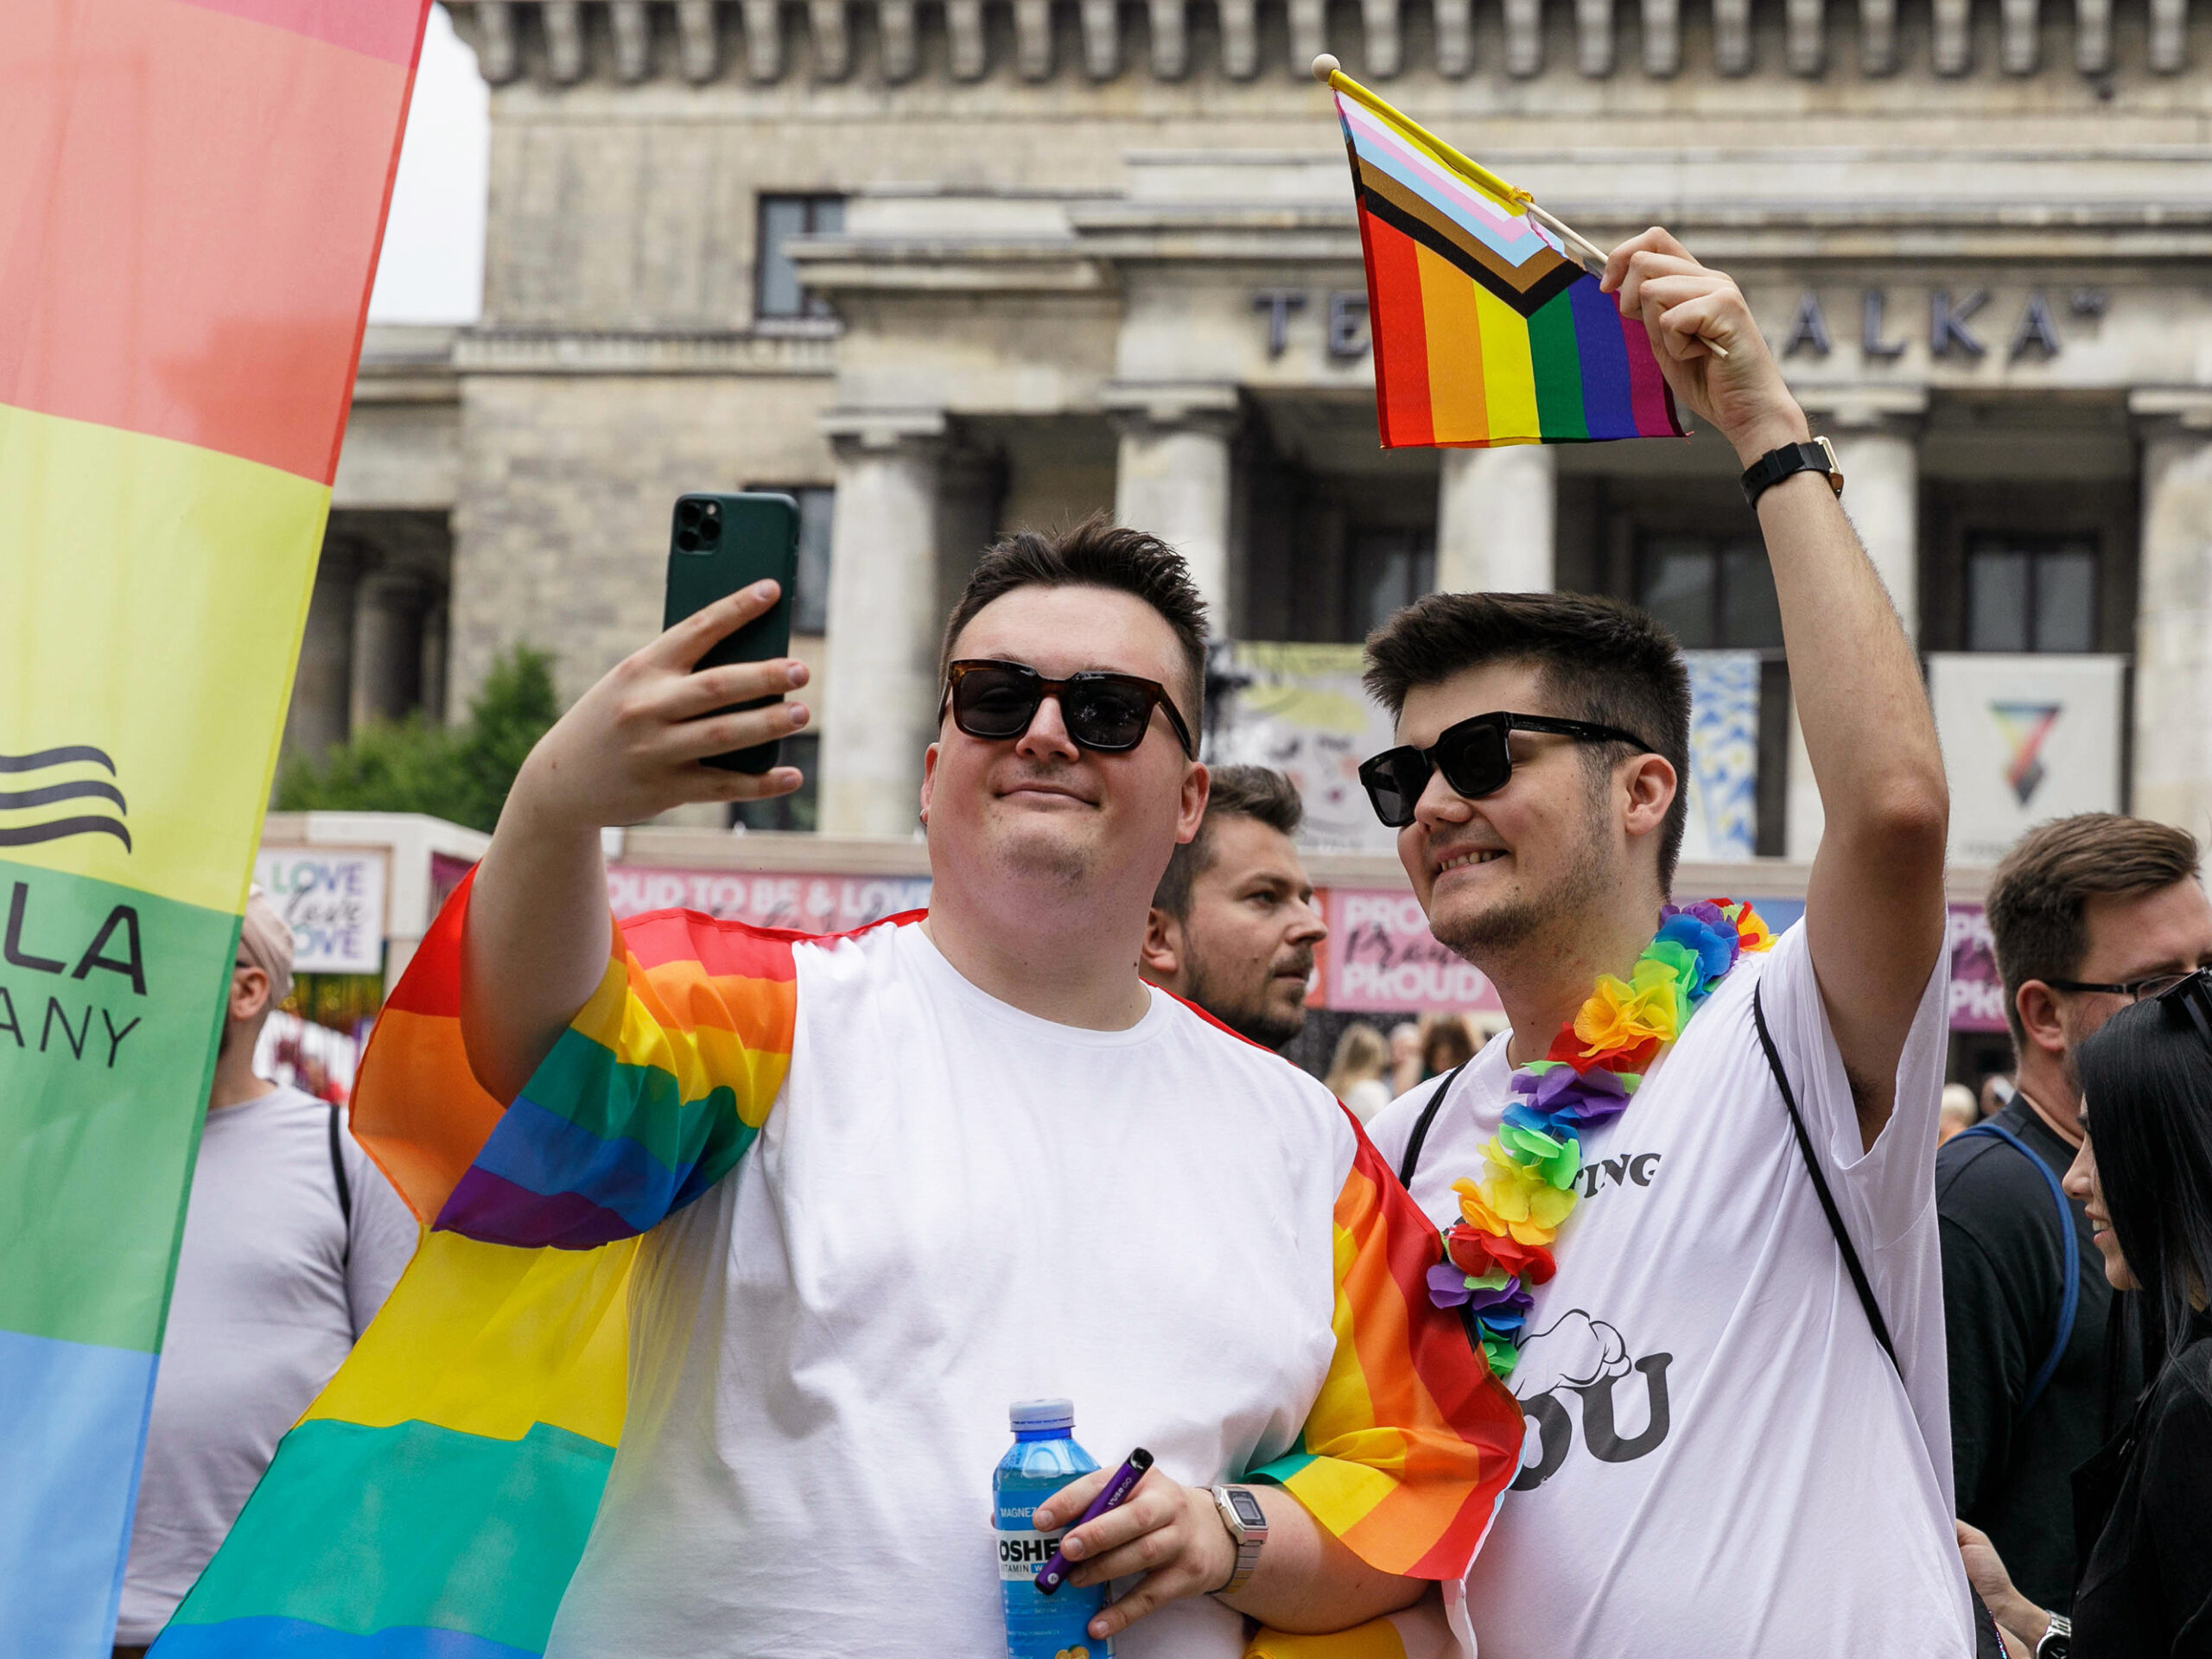 After years of legal discrimination, Poland’s same-sex couples await civil union law